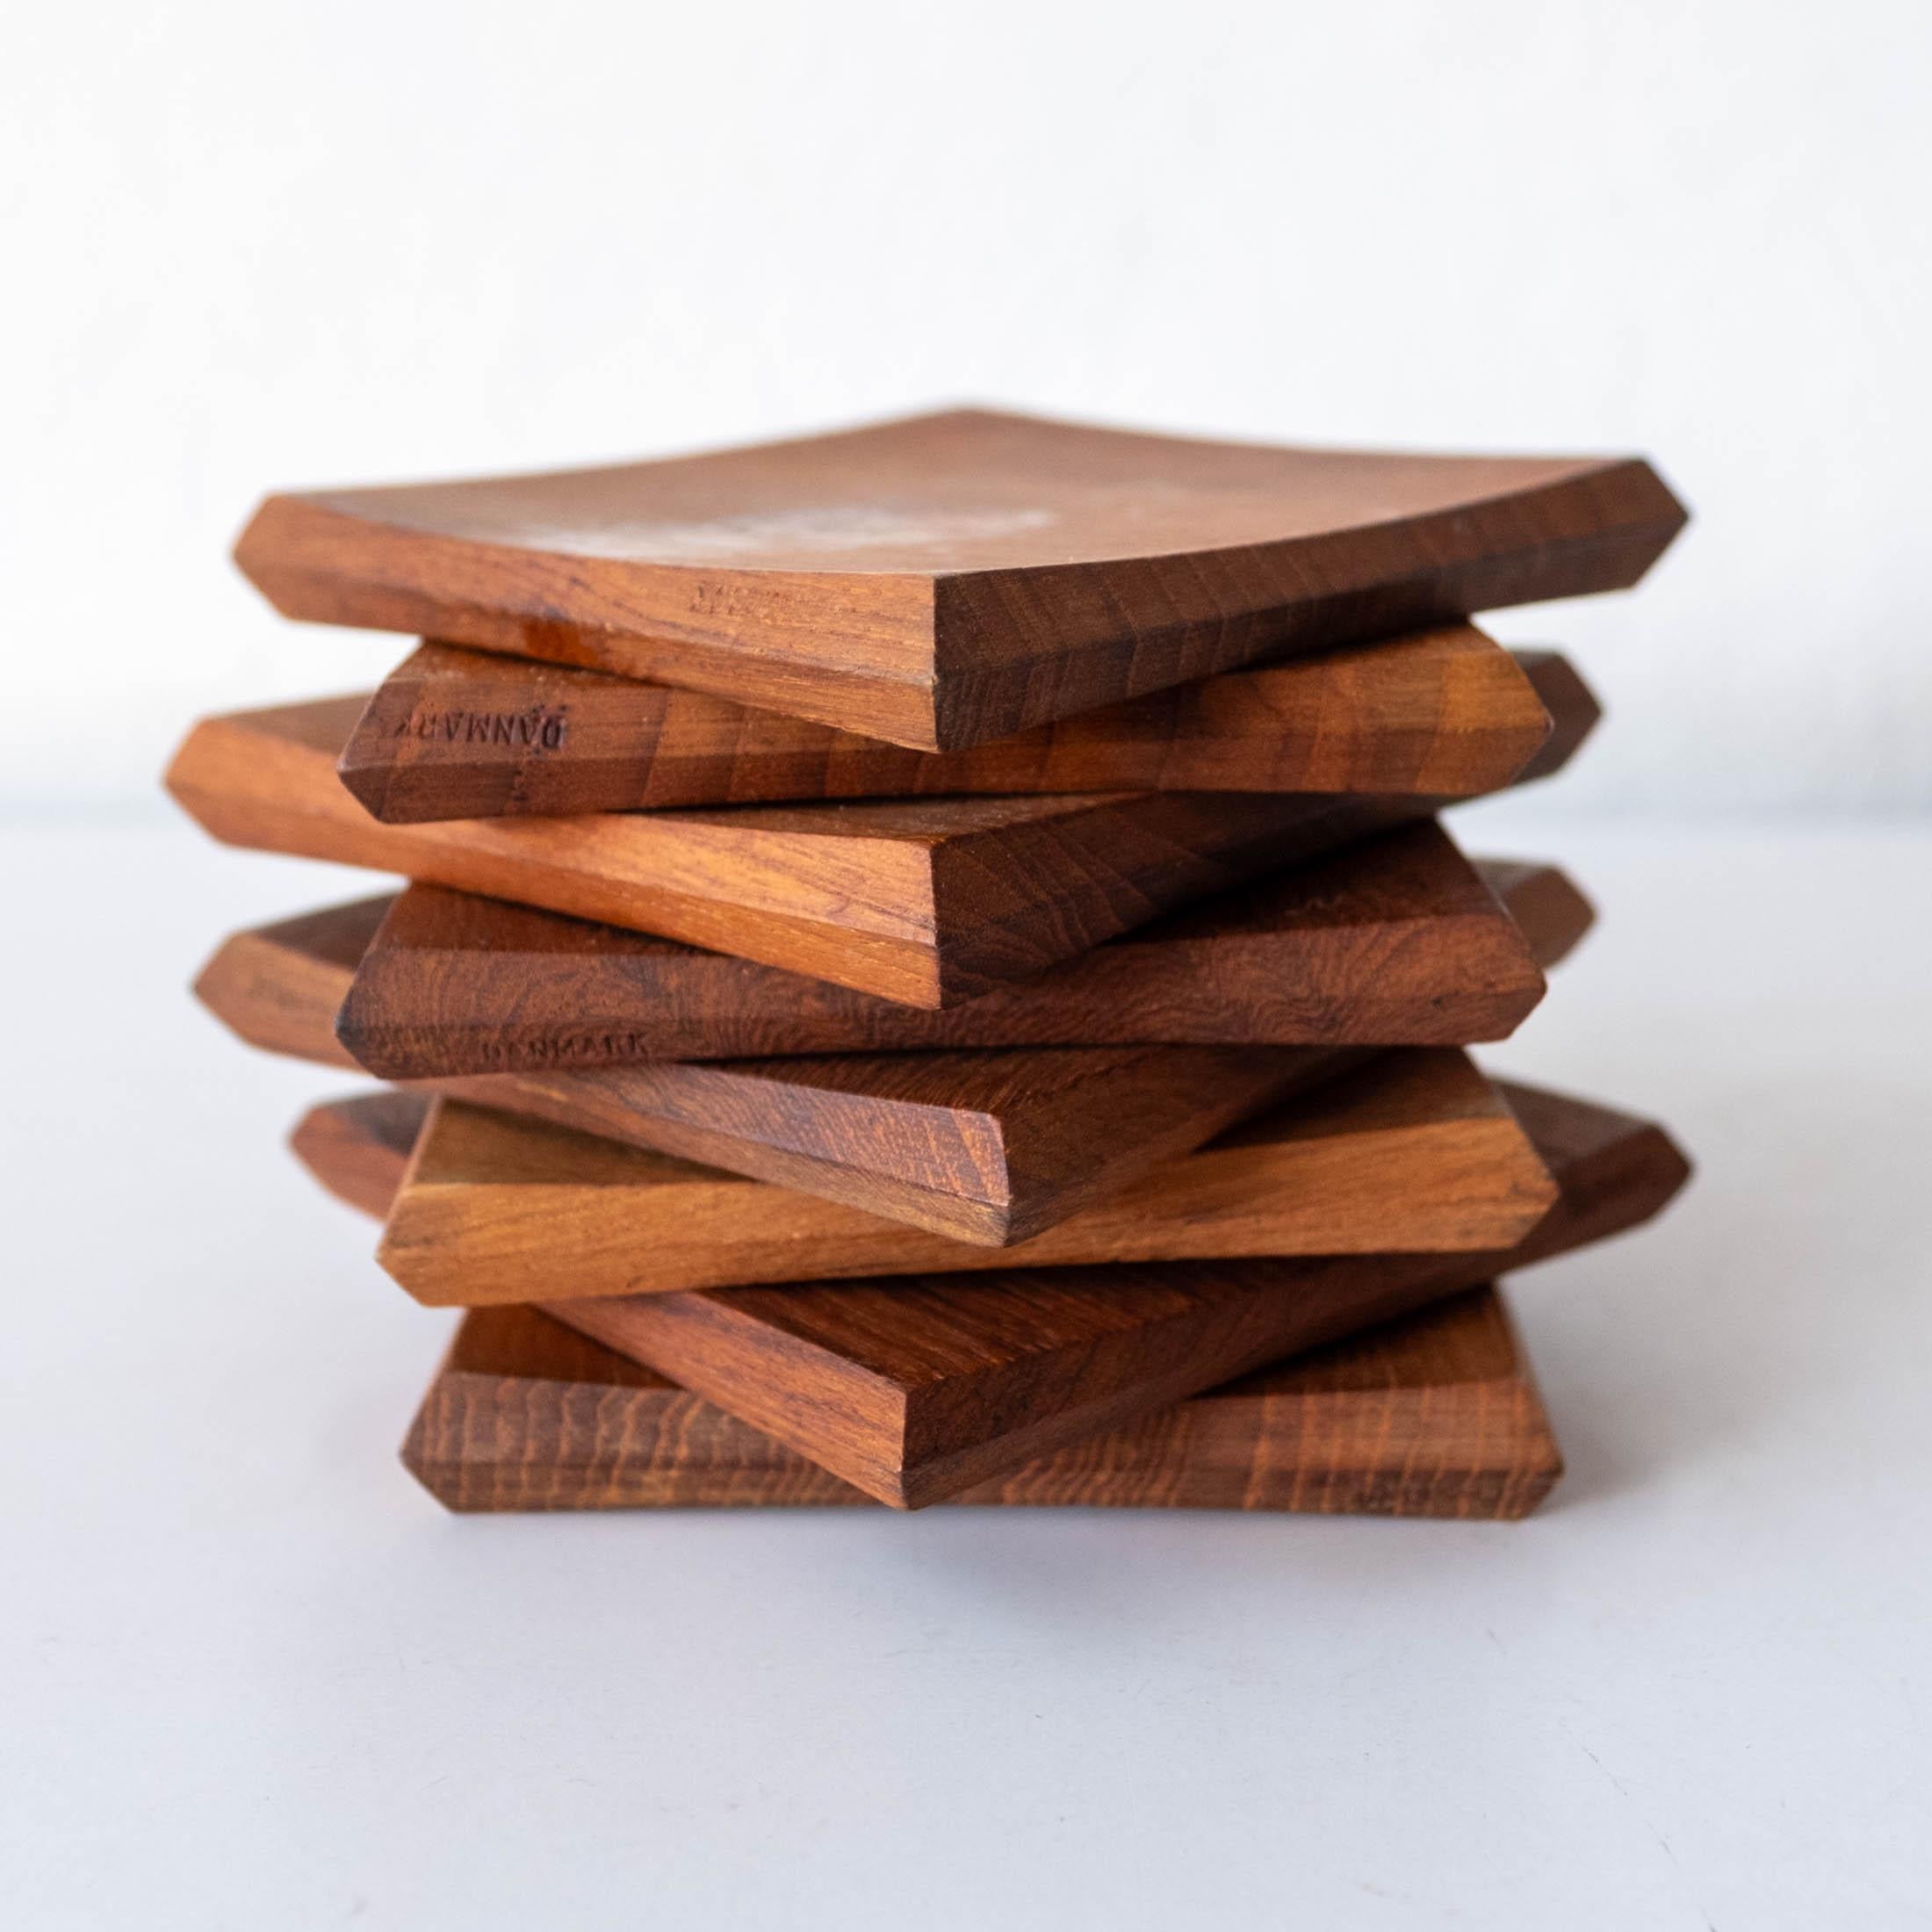 Mid-Century Danish Modern teak coaster set by Jens H. Quistgaard for Dansk. Concave design with beveled edges make for a lot of design packed into a coaster. Includes 8 coasters in the original boxes. One box is missing the lid. Solid teak. Each